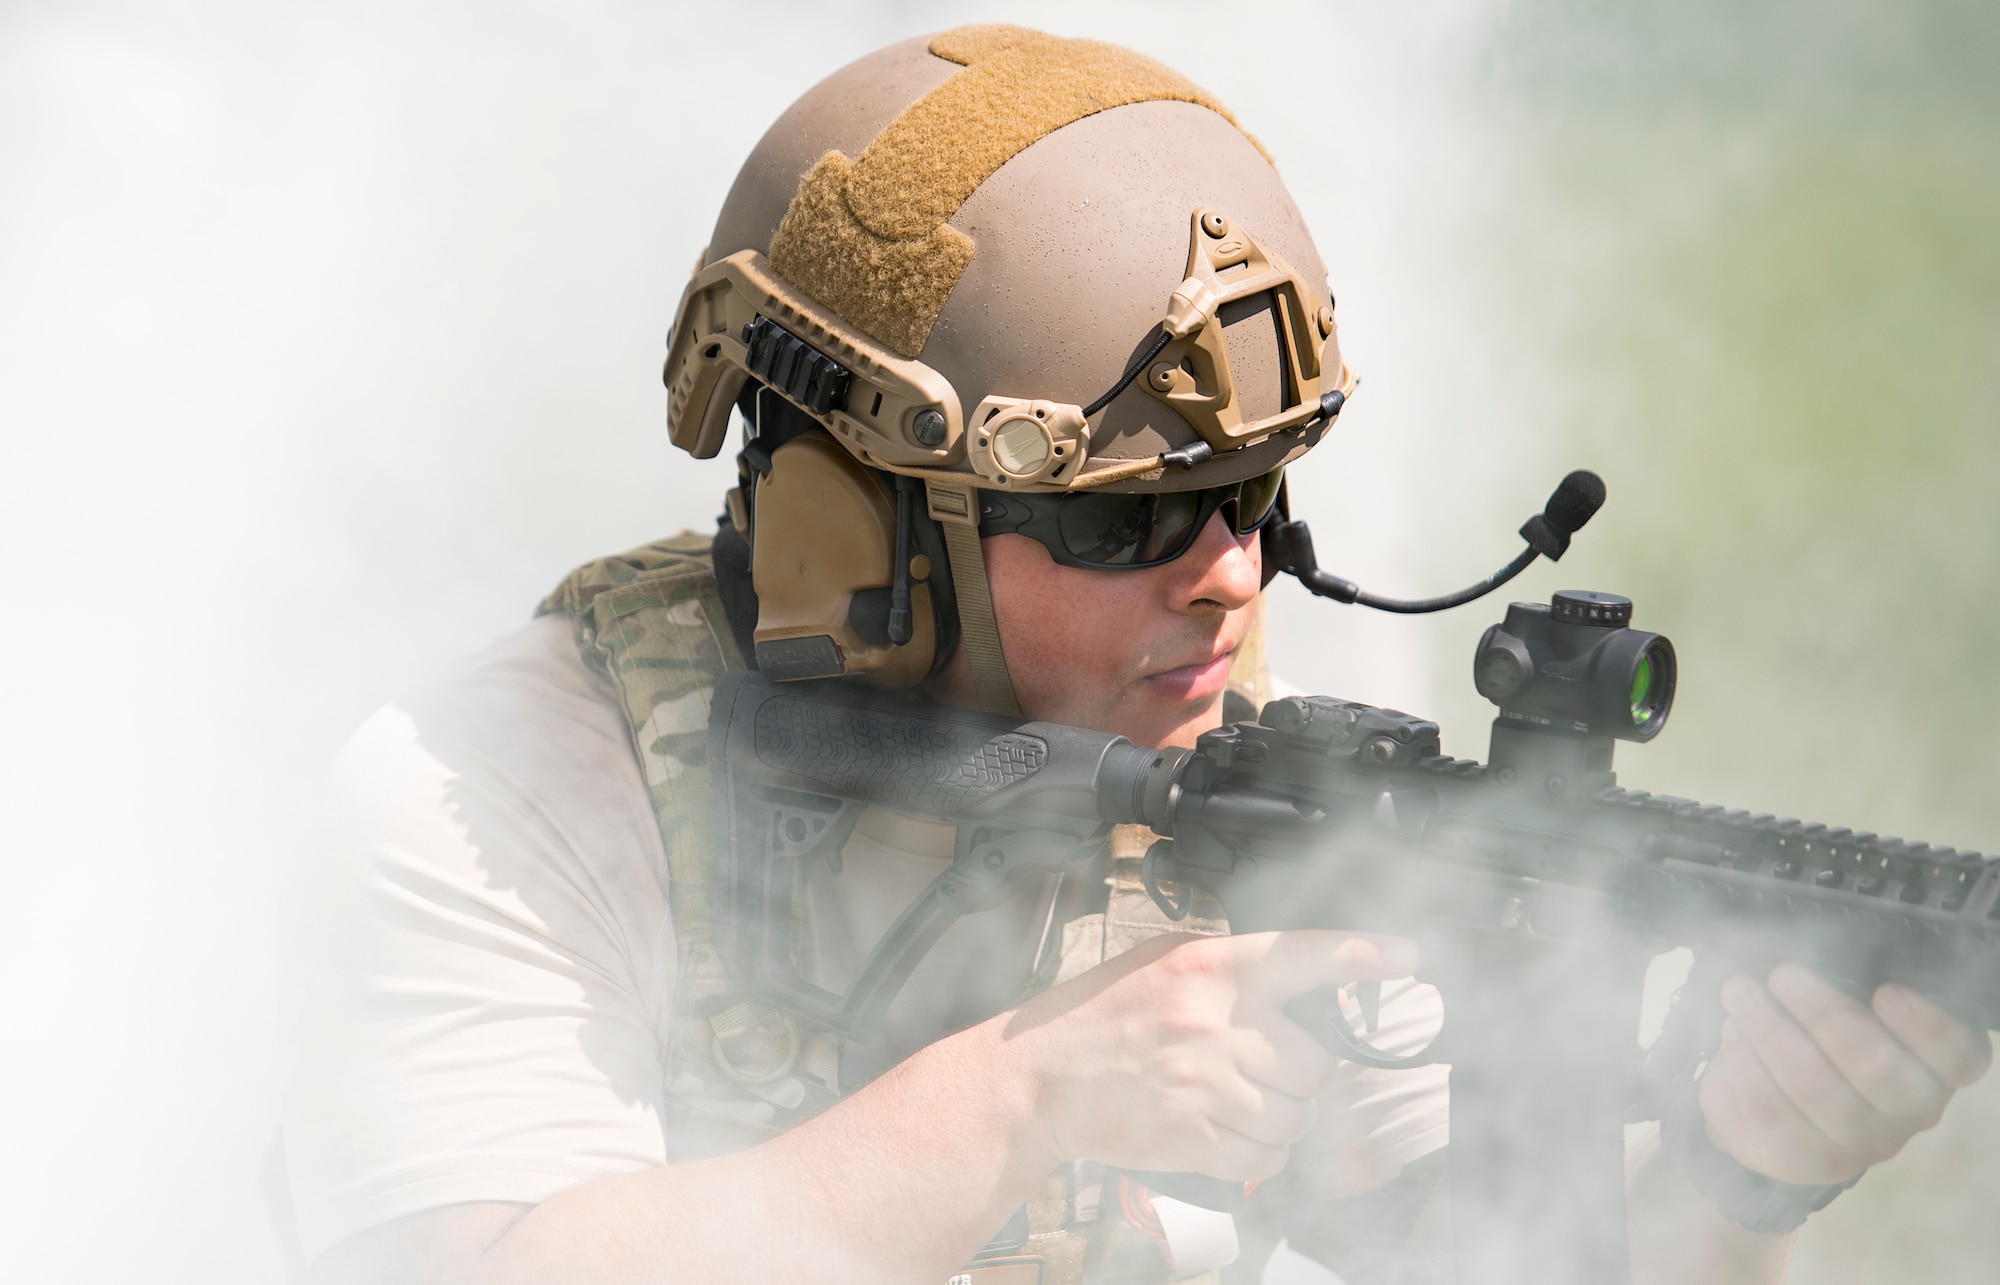 U.S. Air Force Senior Airman Michael Triana, 347th Operations Support Squadron independent duty medical technician-paramedic, looks for targets while providing security for his team during a tactical combat casualty care course, Sept. 22, 2016, in Okeechobee, Fla. During the scenario, the fire team secured the area, found the patient, provided care while under fire, and finally, extracted the patient. (U.S. Air Force photo by Staff Sgt. Ryan Callaghan)